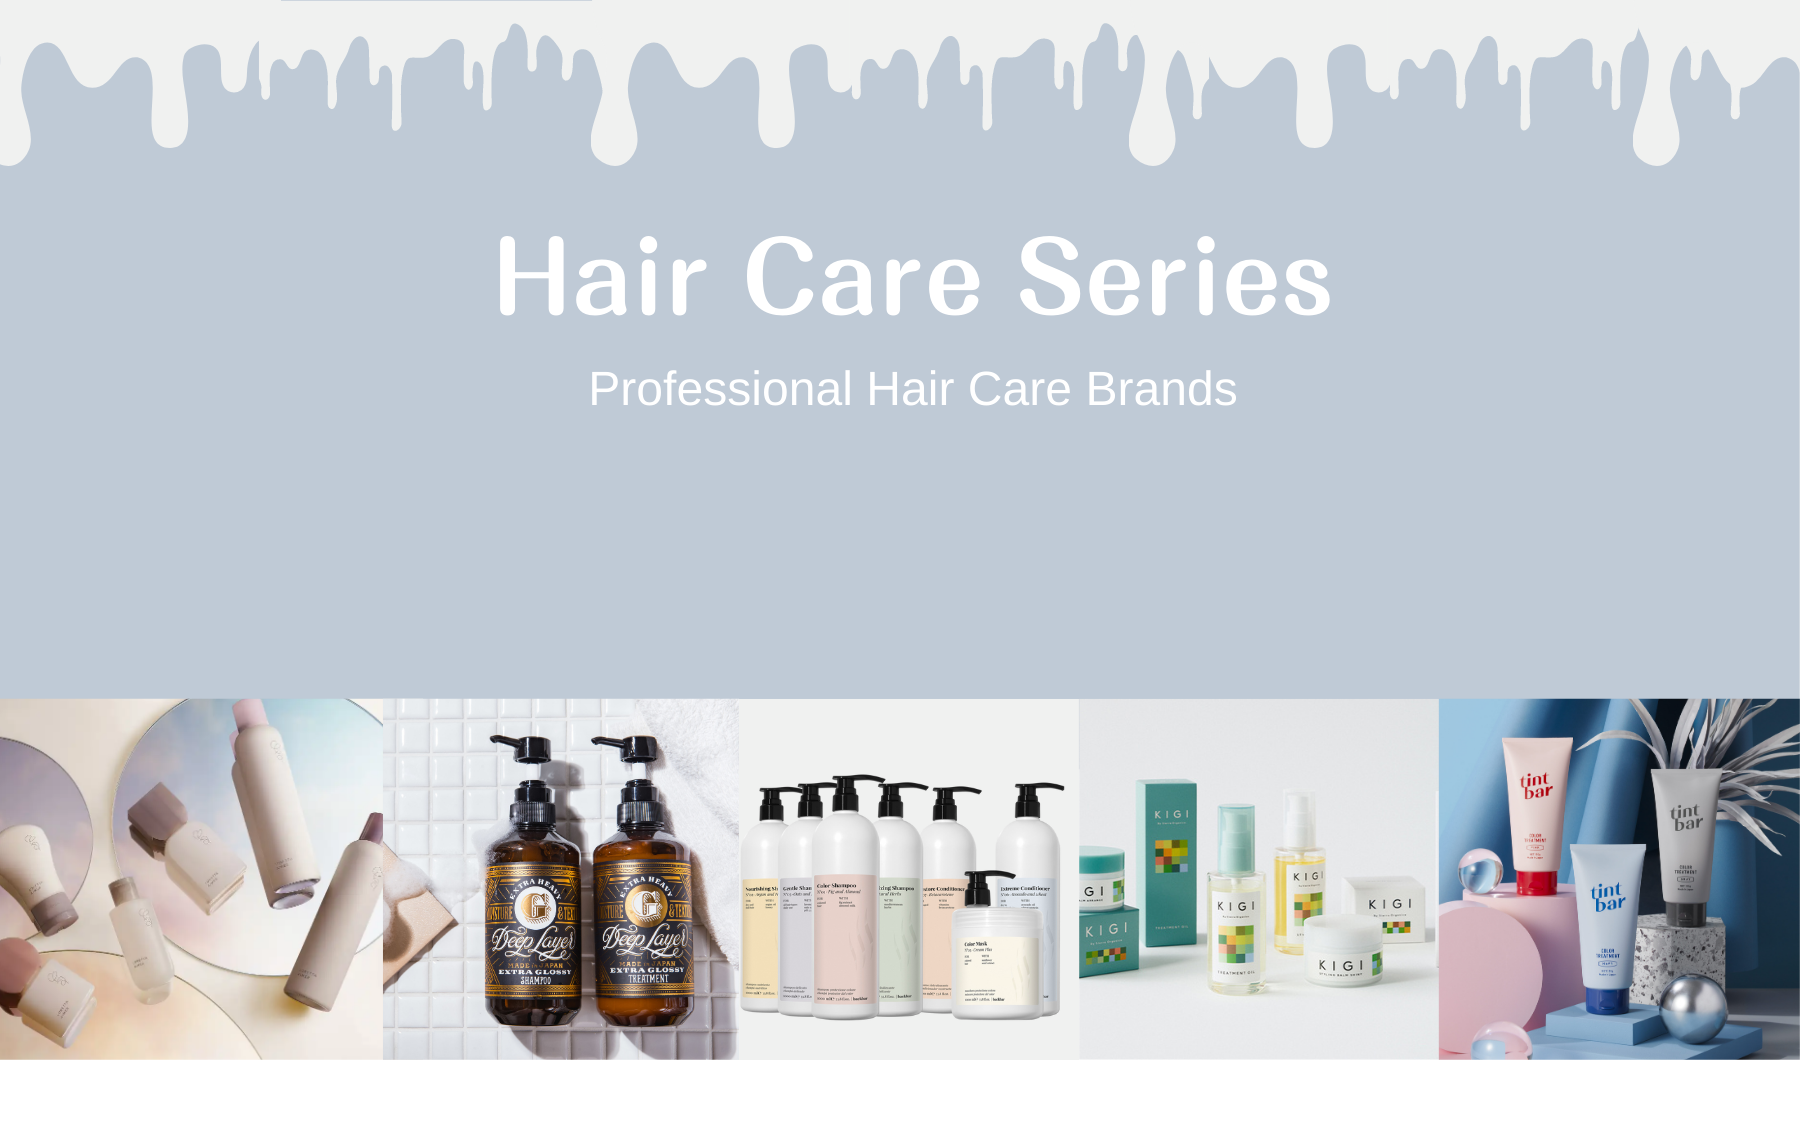 Professional Hair Care Series